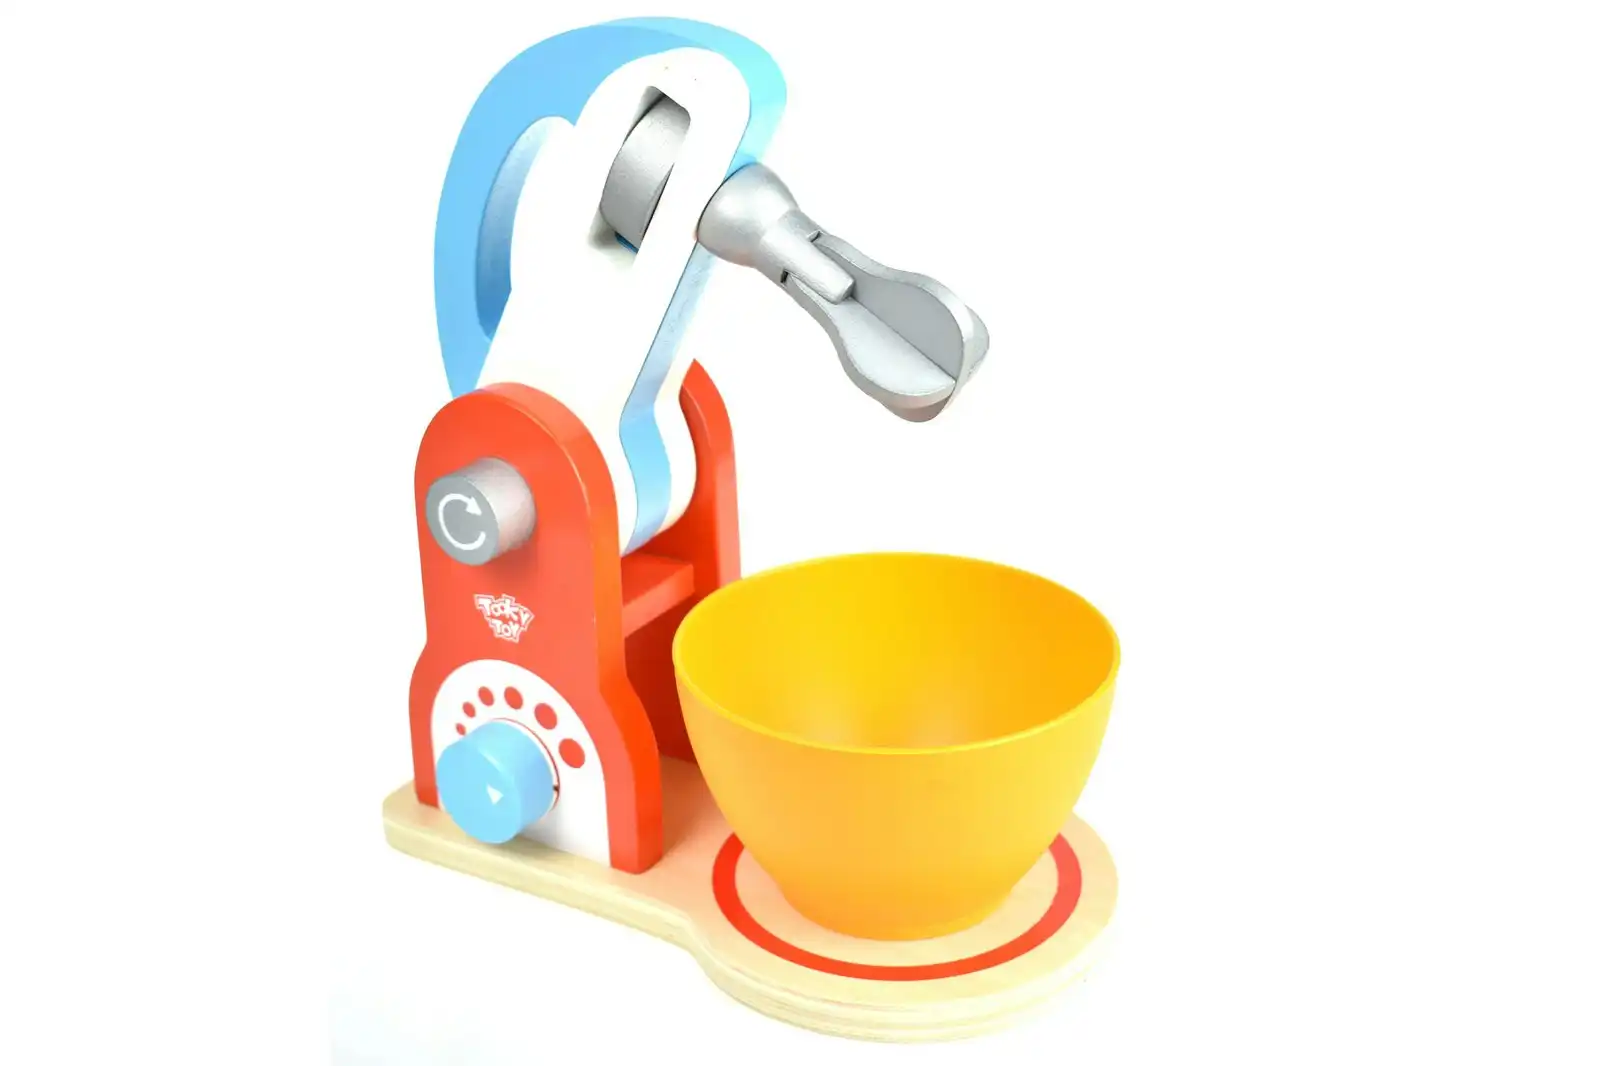 Tooky Toy Mixer Toddler/Kids Creative/Imagination Cooking Themed Chef Toy